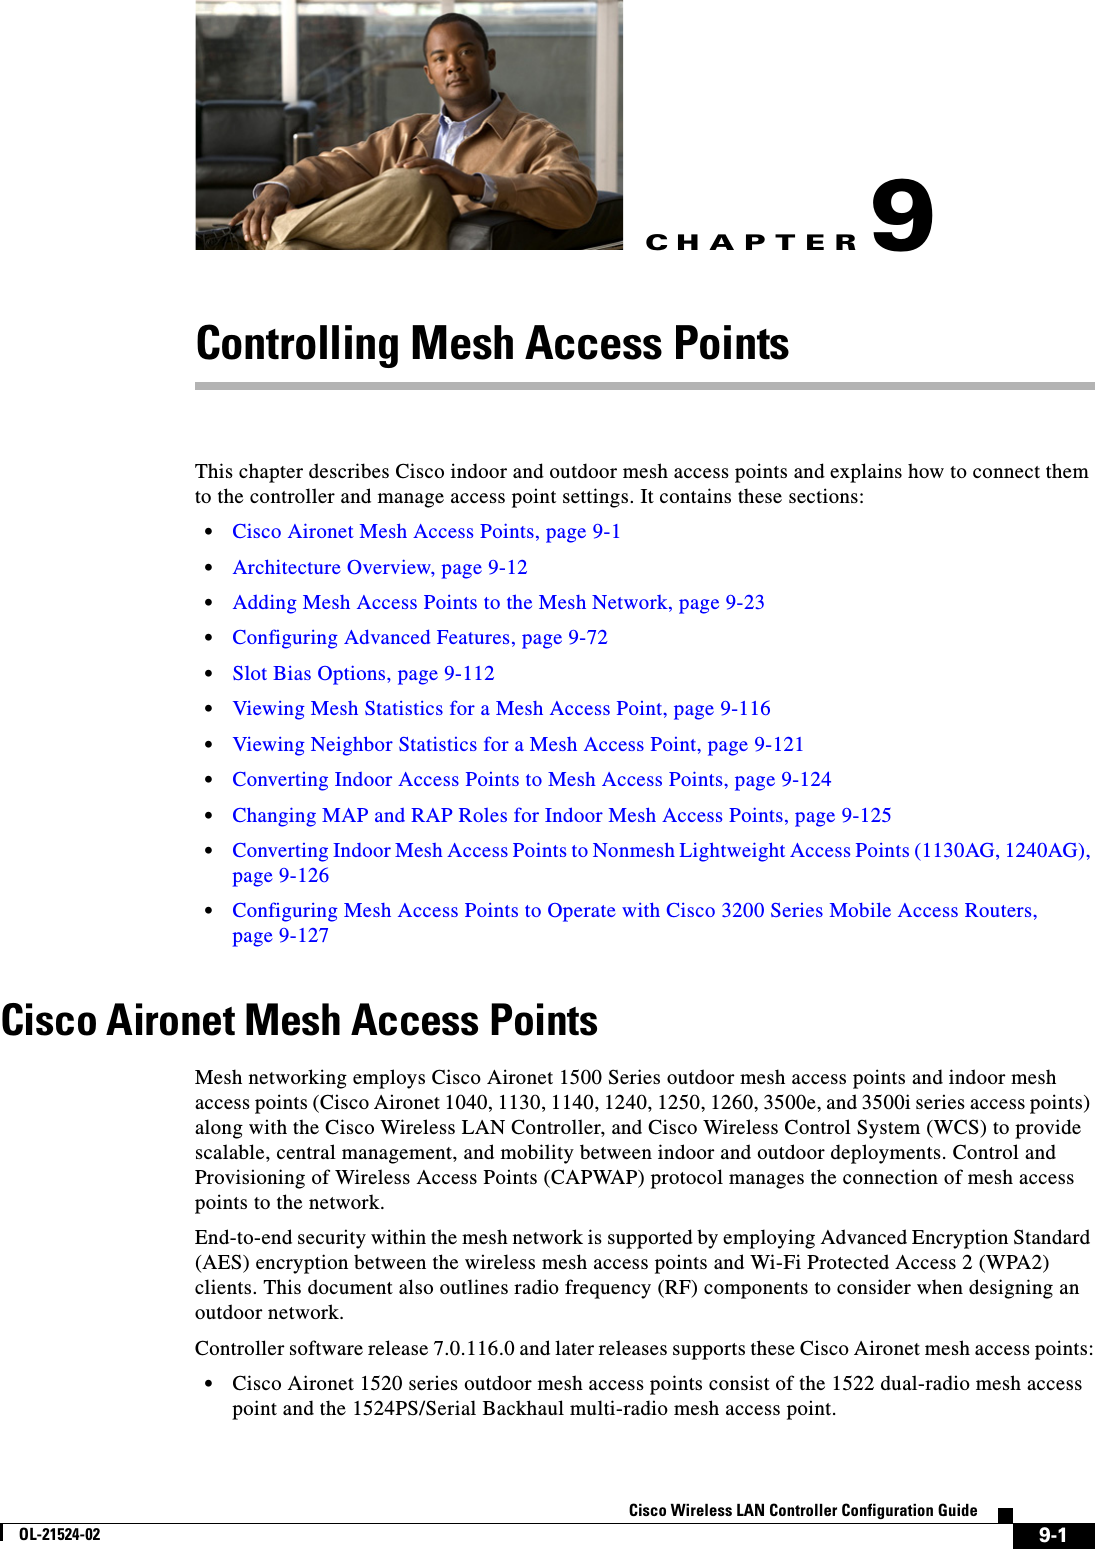 CHAPTER9-1Cisco Wireless LAN Controller Configuration GuideOL-21524-029Controlling Mesh Access PointsThis chapter describes Cisco indoor and outdoor mesh access points and explains how to connect them to the controller and manage access point settings. It contains these sections:  • Cisco Aironet Mesh Access Points, page 9-1  • Architecture Overview, page 9-12  • Adding Mesh Access Points to the Mesh Network, page 9-23  • Configuring Advanced Features, page 9-72  • Slot Bias Options, page 9-112  • Viewing Mesh Statistics for a Mesh Access Point, page 9-116  • Viewing Neighbor Statistics for a Mesh Access Point, page 9-121  • Converting Indoor Access Points to Mesh Access Points, page 9-124  • Changing MAP and RAP Roles for Indoor Mesh Access Points, page 9-125  • Converting Indoor Mesh Access Points to Nonmesh Lightweight Access Points (1130AG, 1240AG), page 9-126  • Configuring Mesh Access Points to Operate with Cisco 3200 Series Mobile Access Routers, page 9-127Cisco Aironet Mesh Access PointsMesh networking employs Cisco Aironet 1500 Series outdoor mesh access points and indoor mesh access points (Cisco Aironet 1040, 1130, 1140, 1240, 1250, 1260, 3500e, and 3500i series access points) along with the Cisco Wireless LAN Controller, and Cisco Wireless Control System (WCS) to provide scalable, central management, and mobility between indoor and outdoor deployments. Control and Provisioning of Wireless Access Points (CAPWAP) protocol manages the connection of mesh access points to the network.End-to-end security within the mesh network is supported by employing Advanced Encryption Standard (AES) encryption between the wireless mesh access points and Wi-Fi Protected Access 2 (WPA2) clients. This document also outlines radio frequency (RF) components to consider when designing an outdoor network.Controller software release 7.0.116.0 and later releases supports these Cisco Aironet mesh access points:  • Cisco Aironet 1520 series outdoor mesh access points consist of the 1522 dual-radio mesh access point and the 1524PS/Serial Backhaul multi-radio mesh access point.